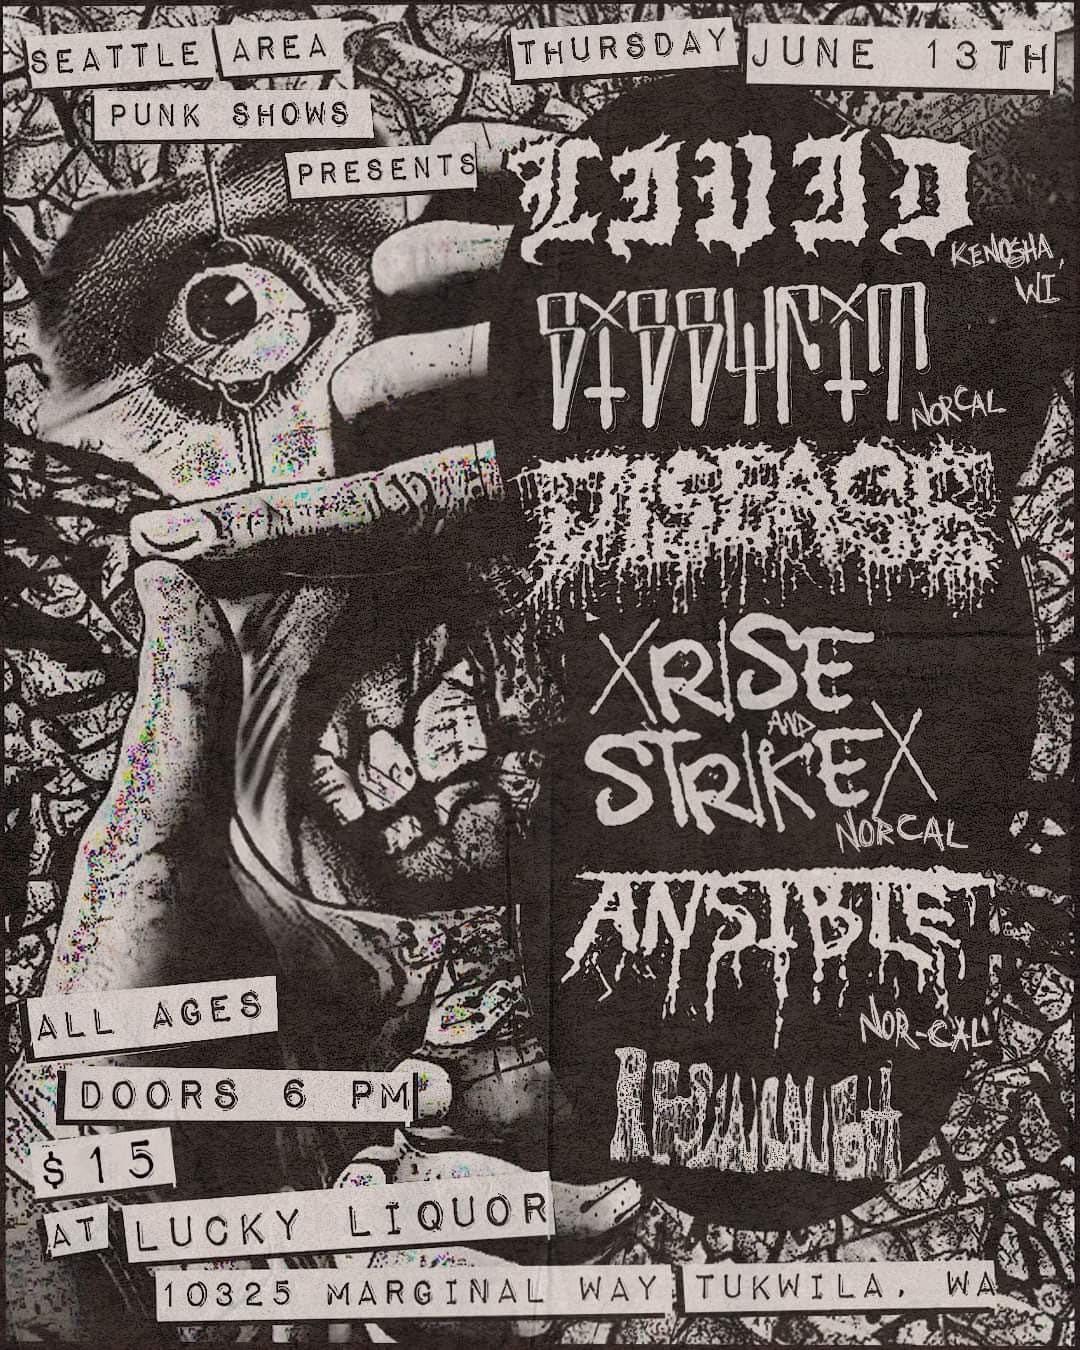 Sissyfit, Livid, Disease, xRise and Strikex, Ansible, Resin Cough @ Lucky Liquor All Ages!